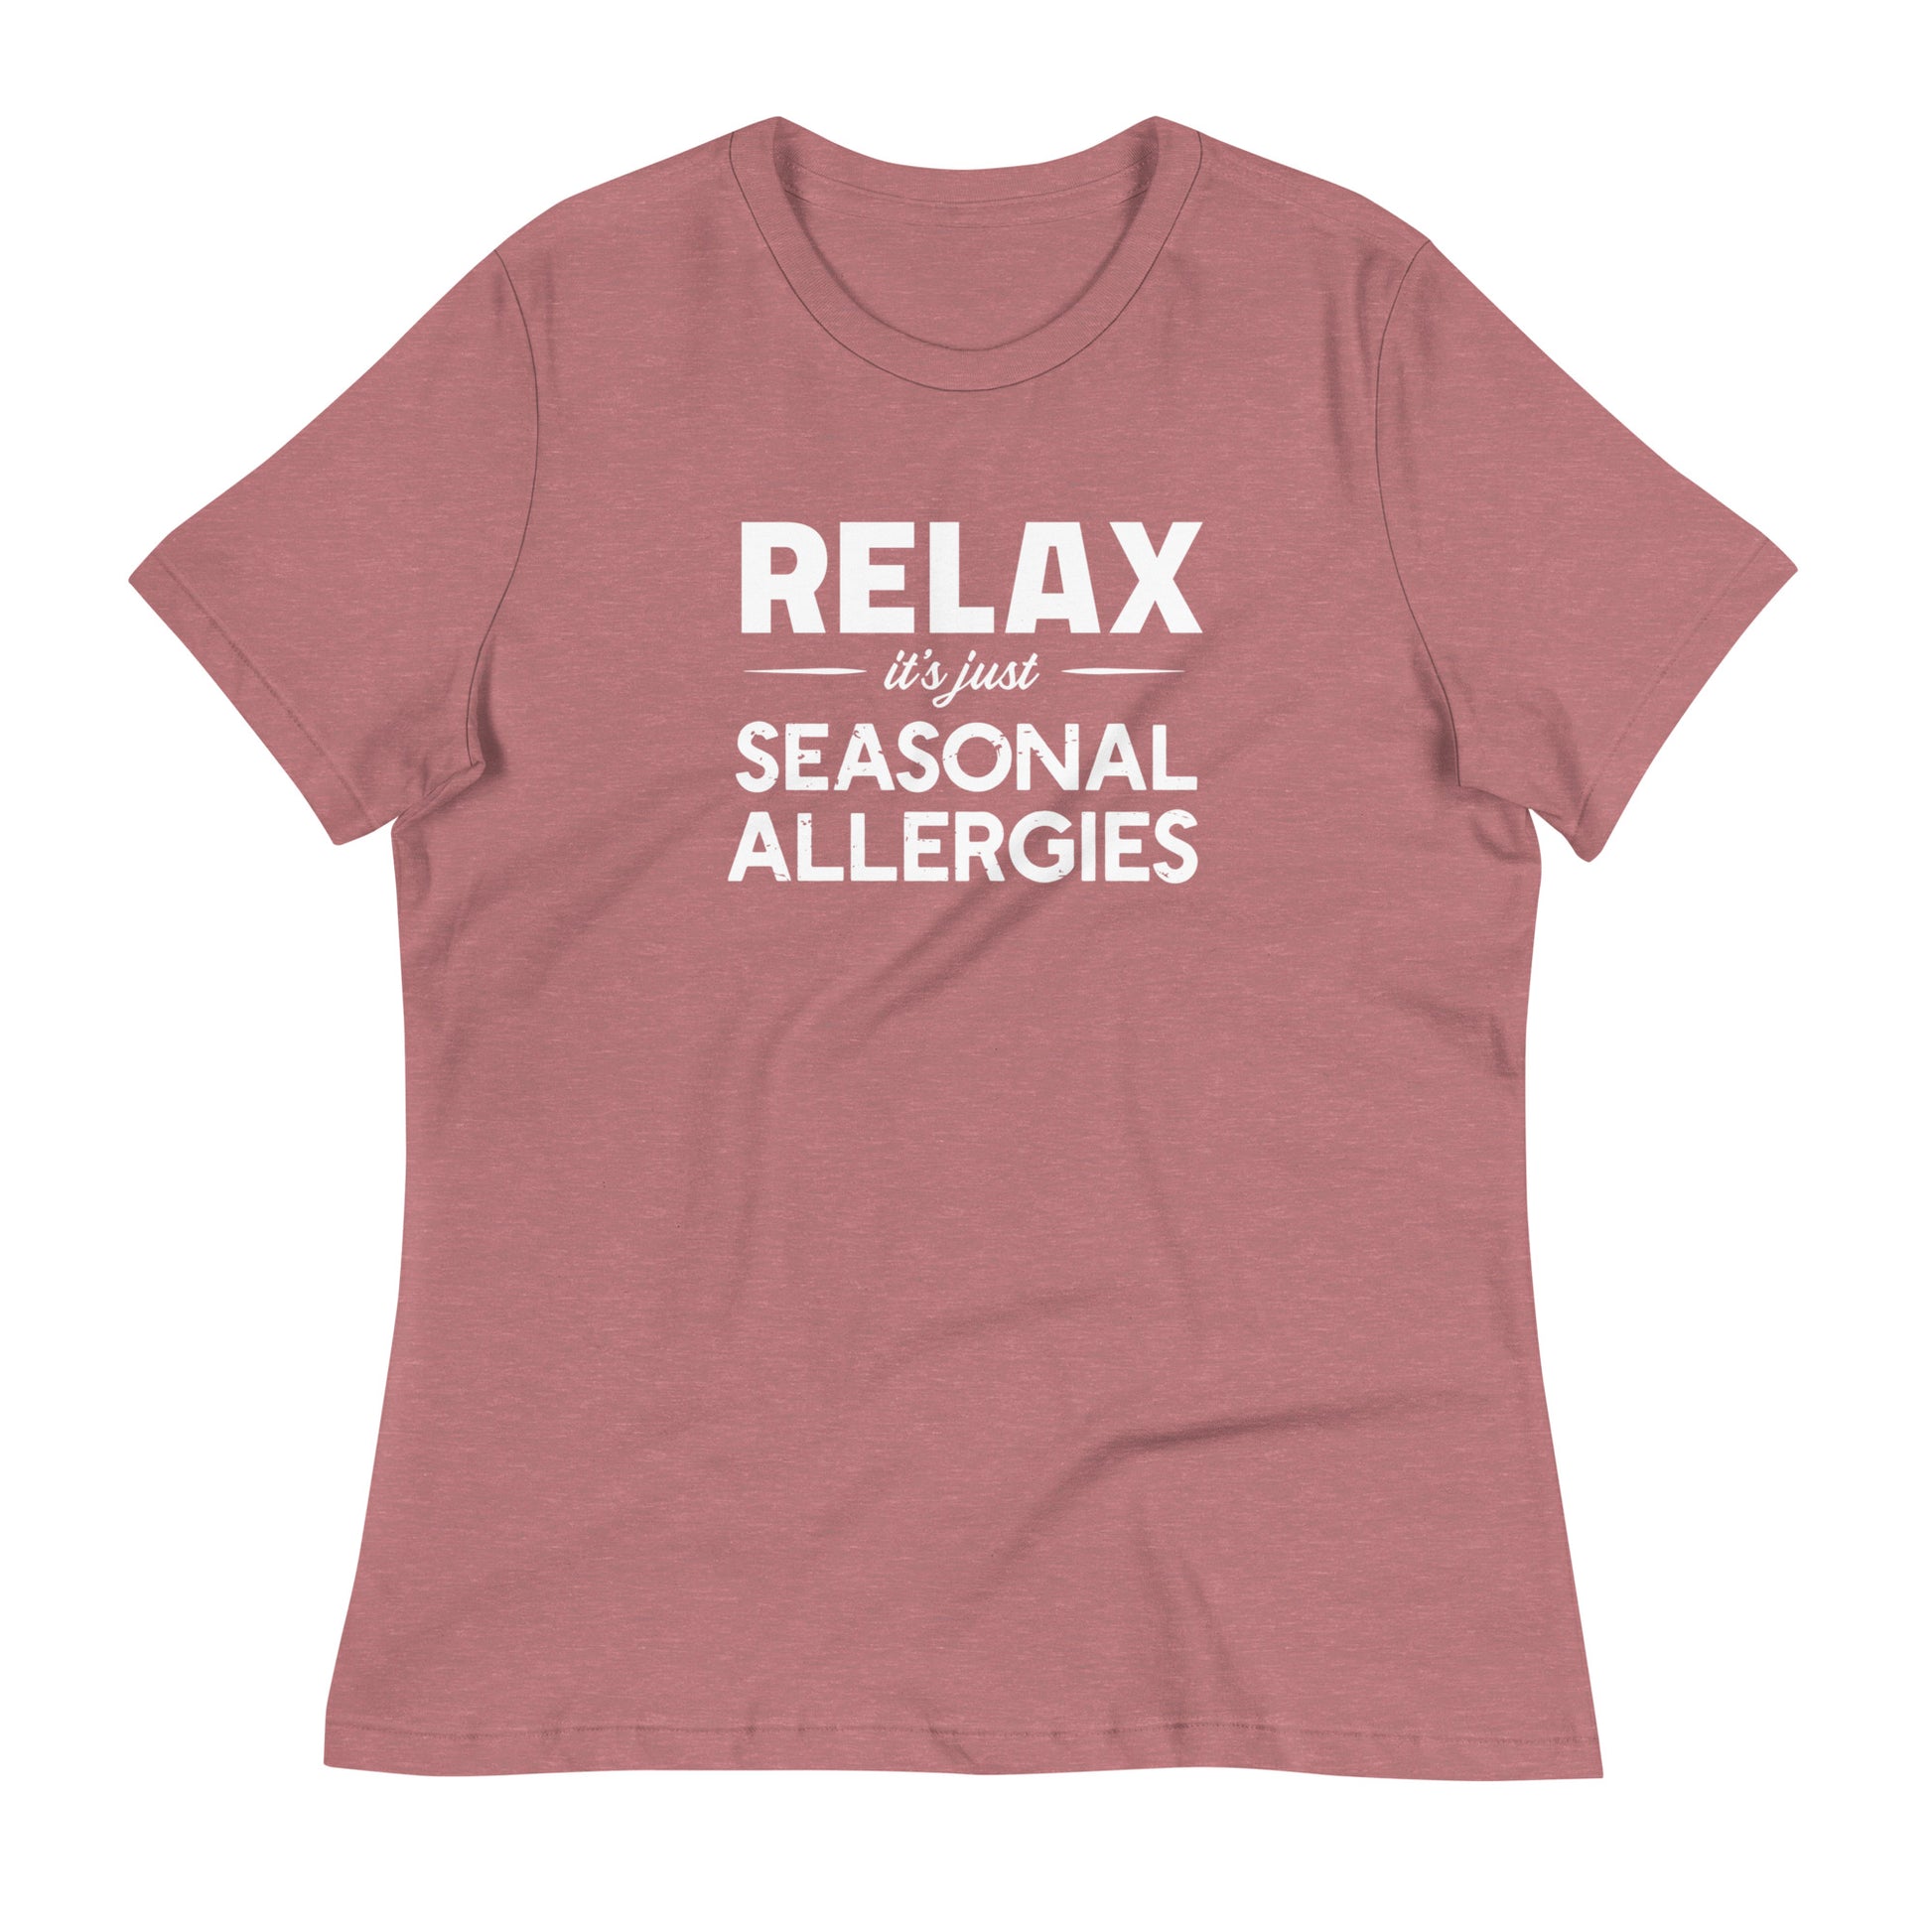 Heather Mauve women's relaxed fit t-shirt with white graphic: "RELAX it's just SEASONAL ALLERGIES"